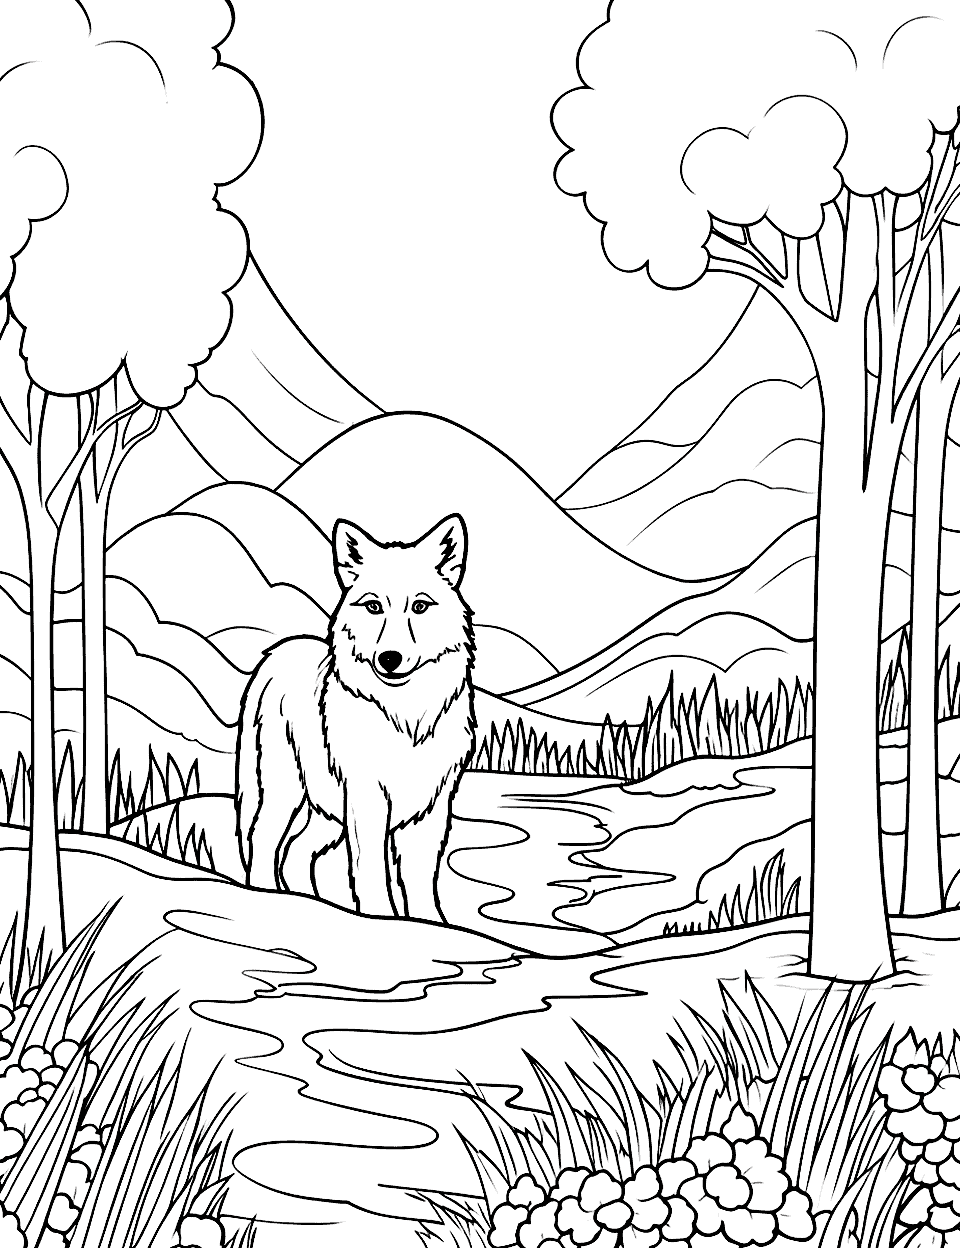 Lone Wolf in the Woods Coloring Page - A single wolf standing in a forest with tall trees all around.